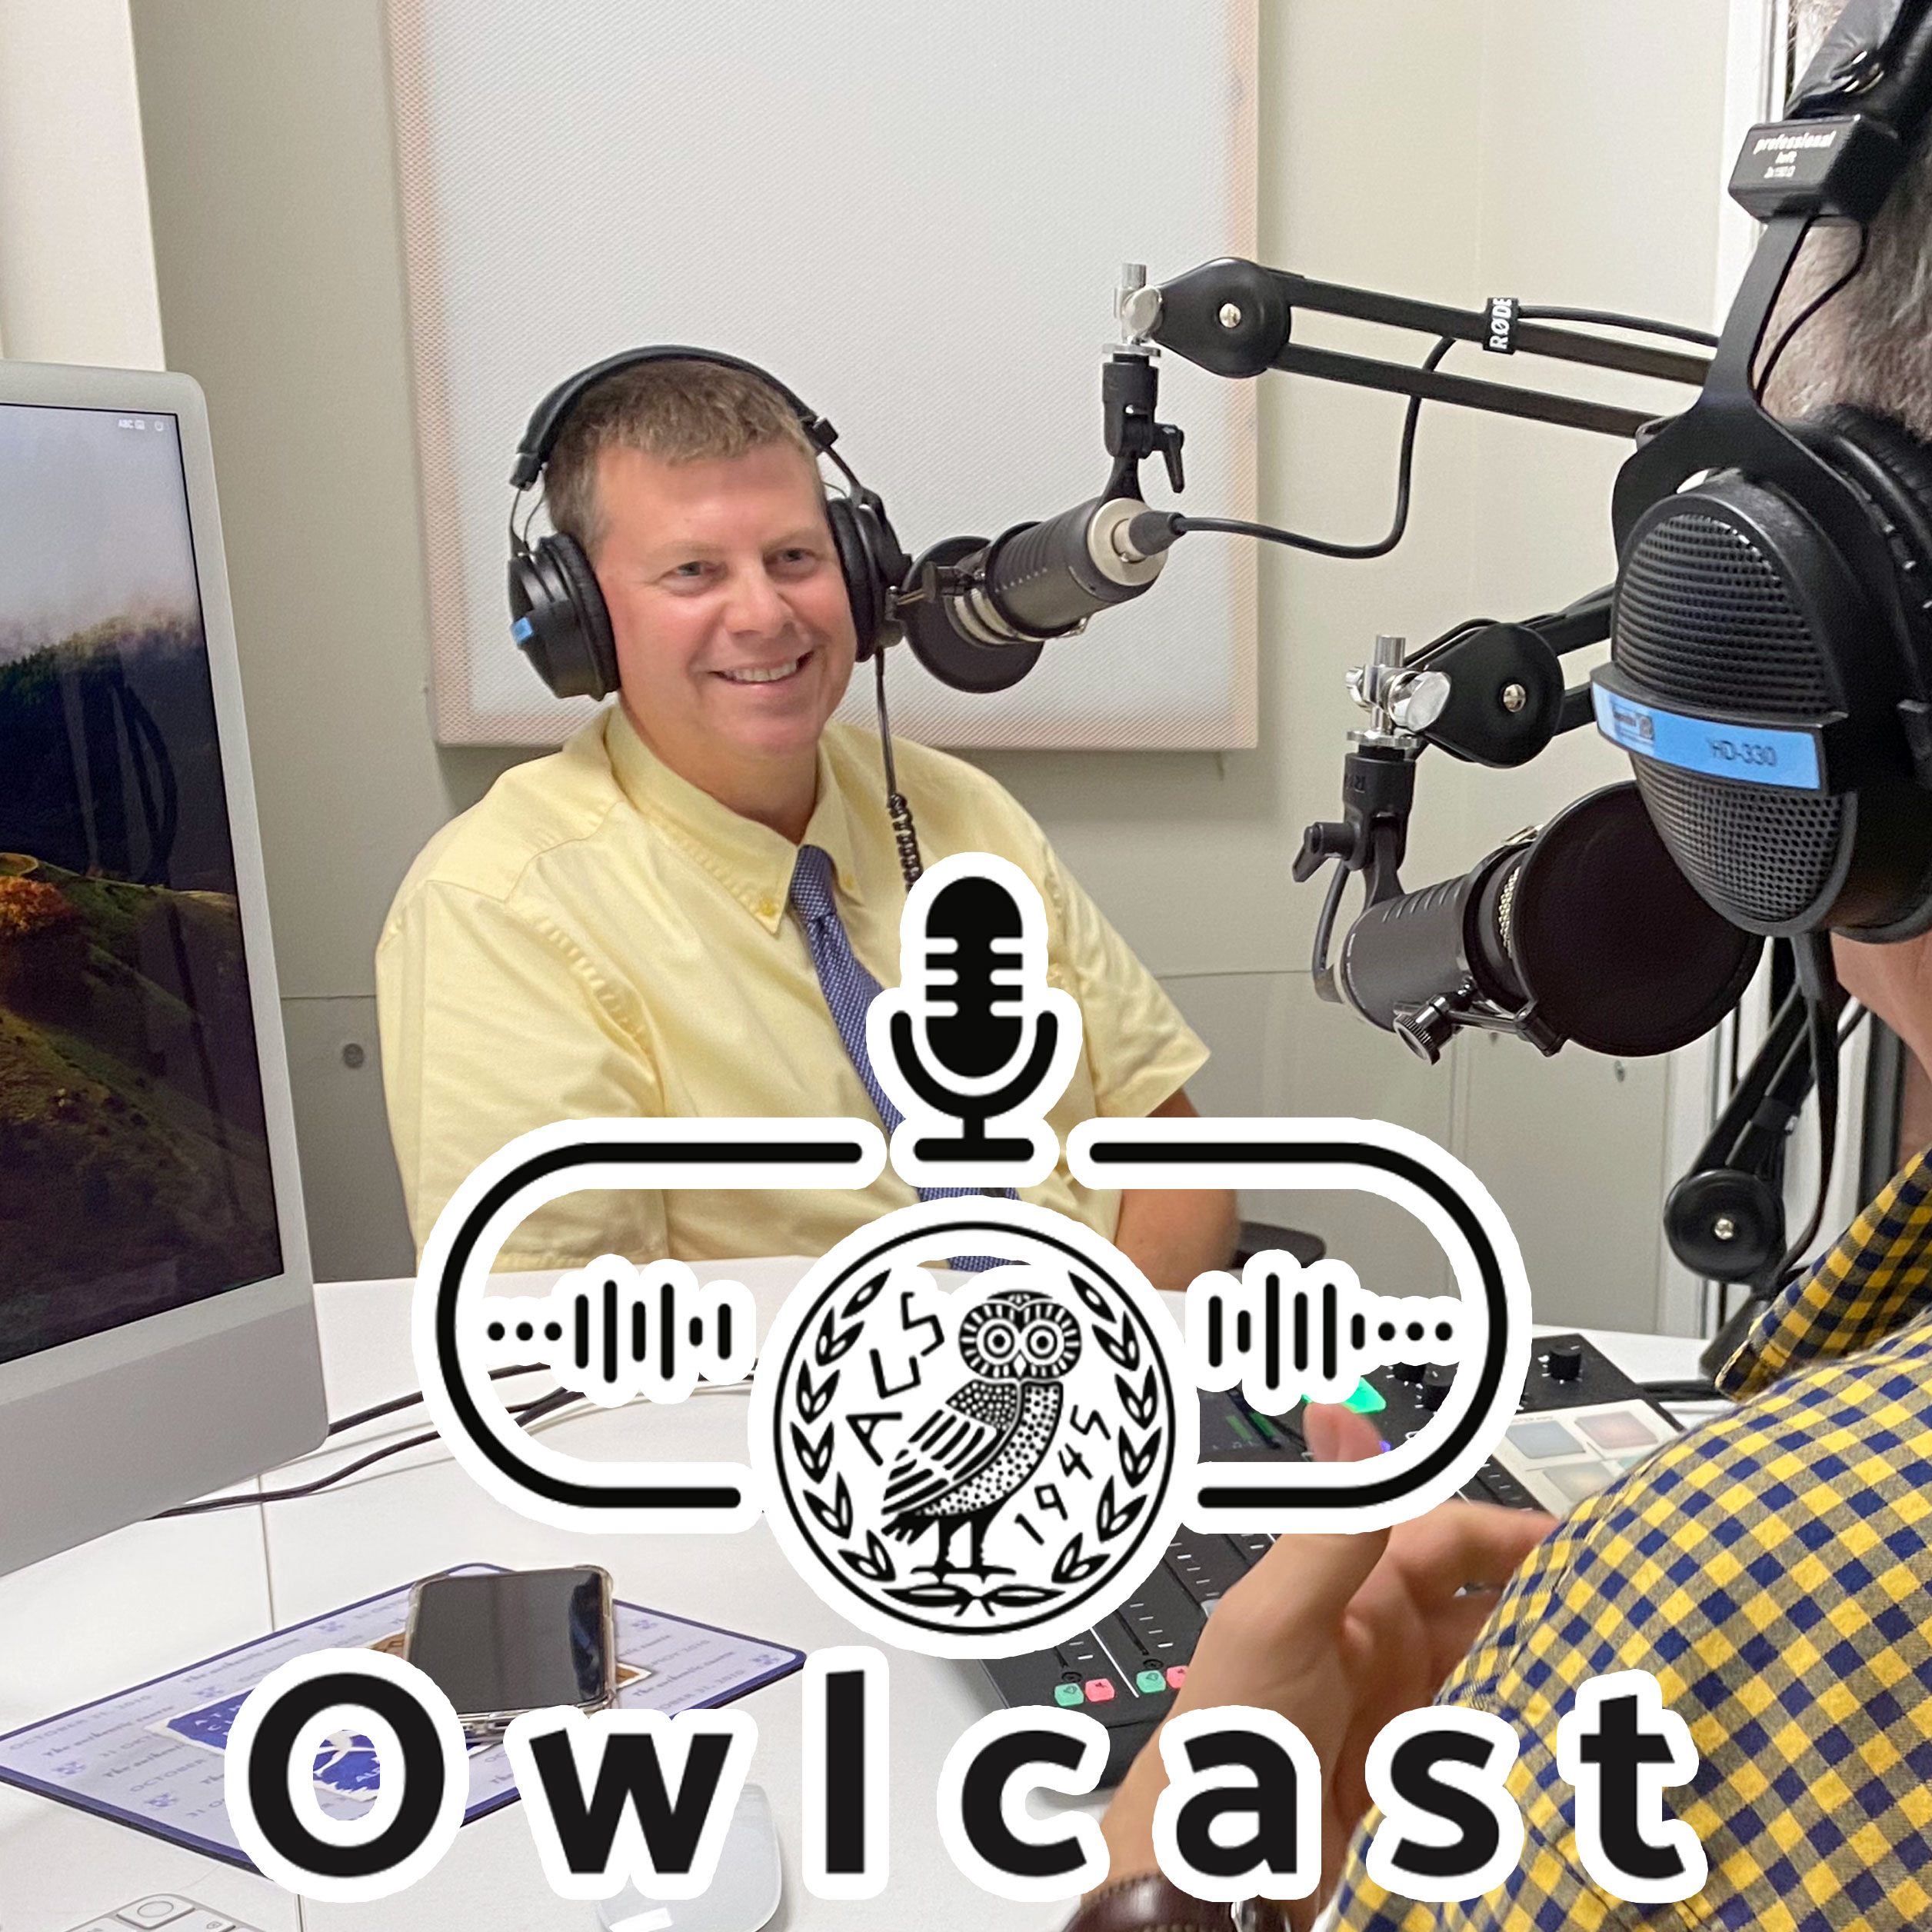 Owlcast 68 - with Mike Embrock